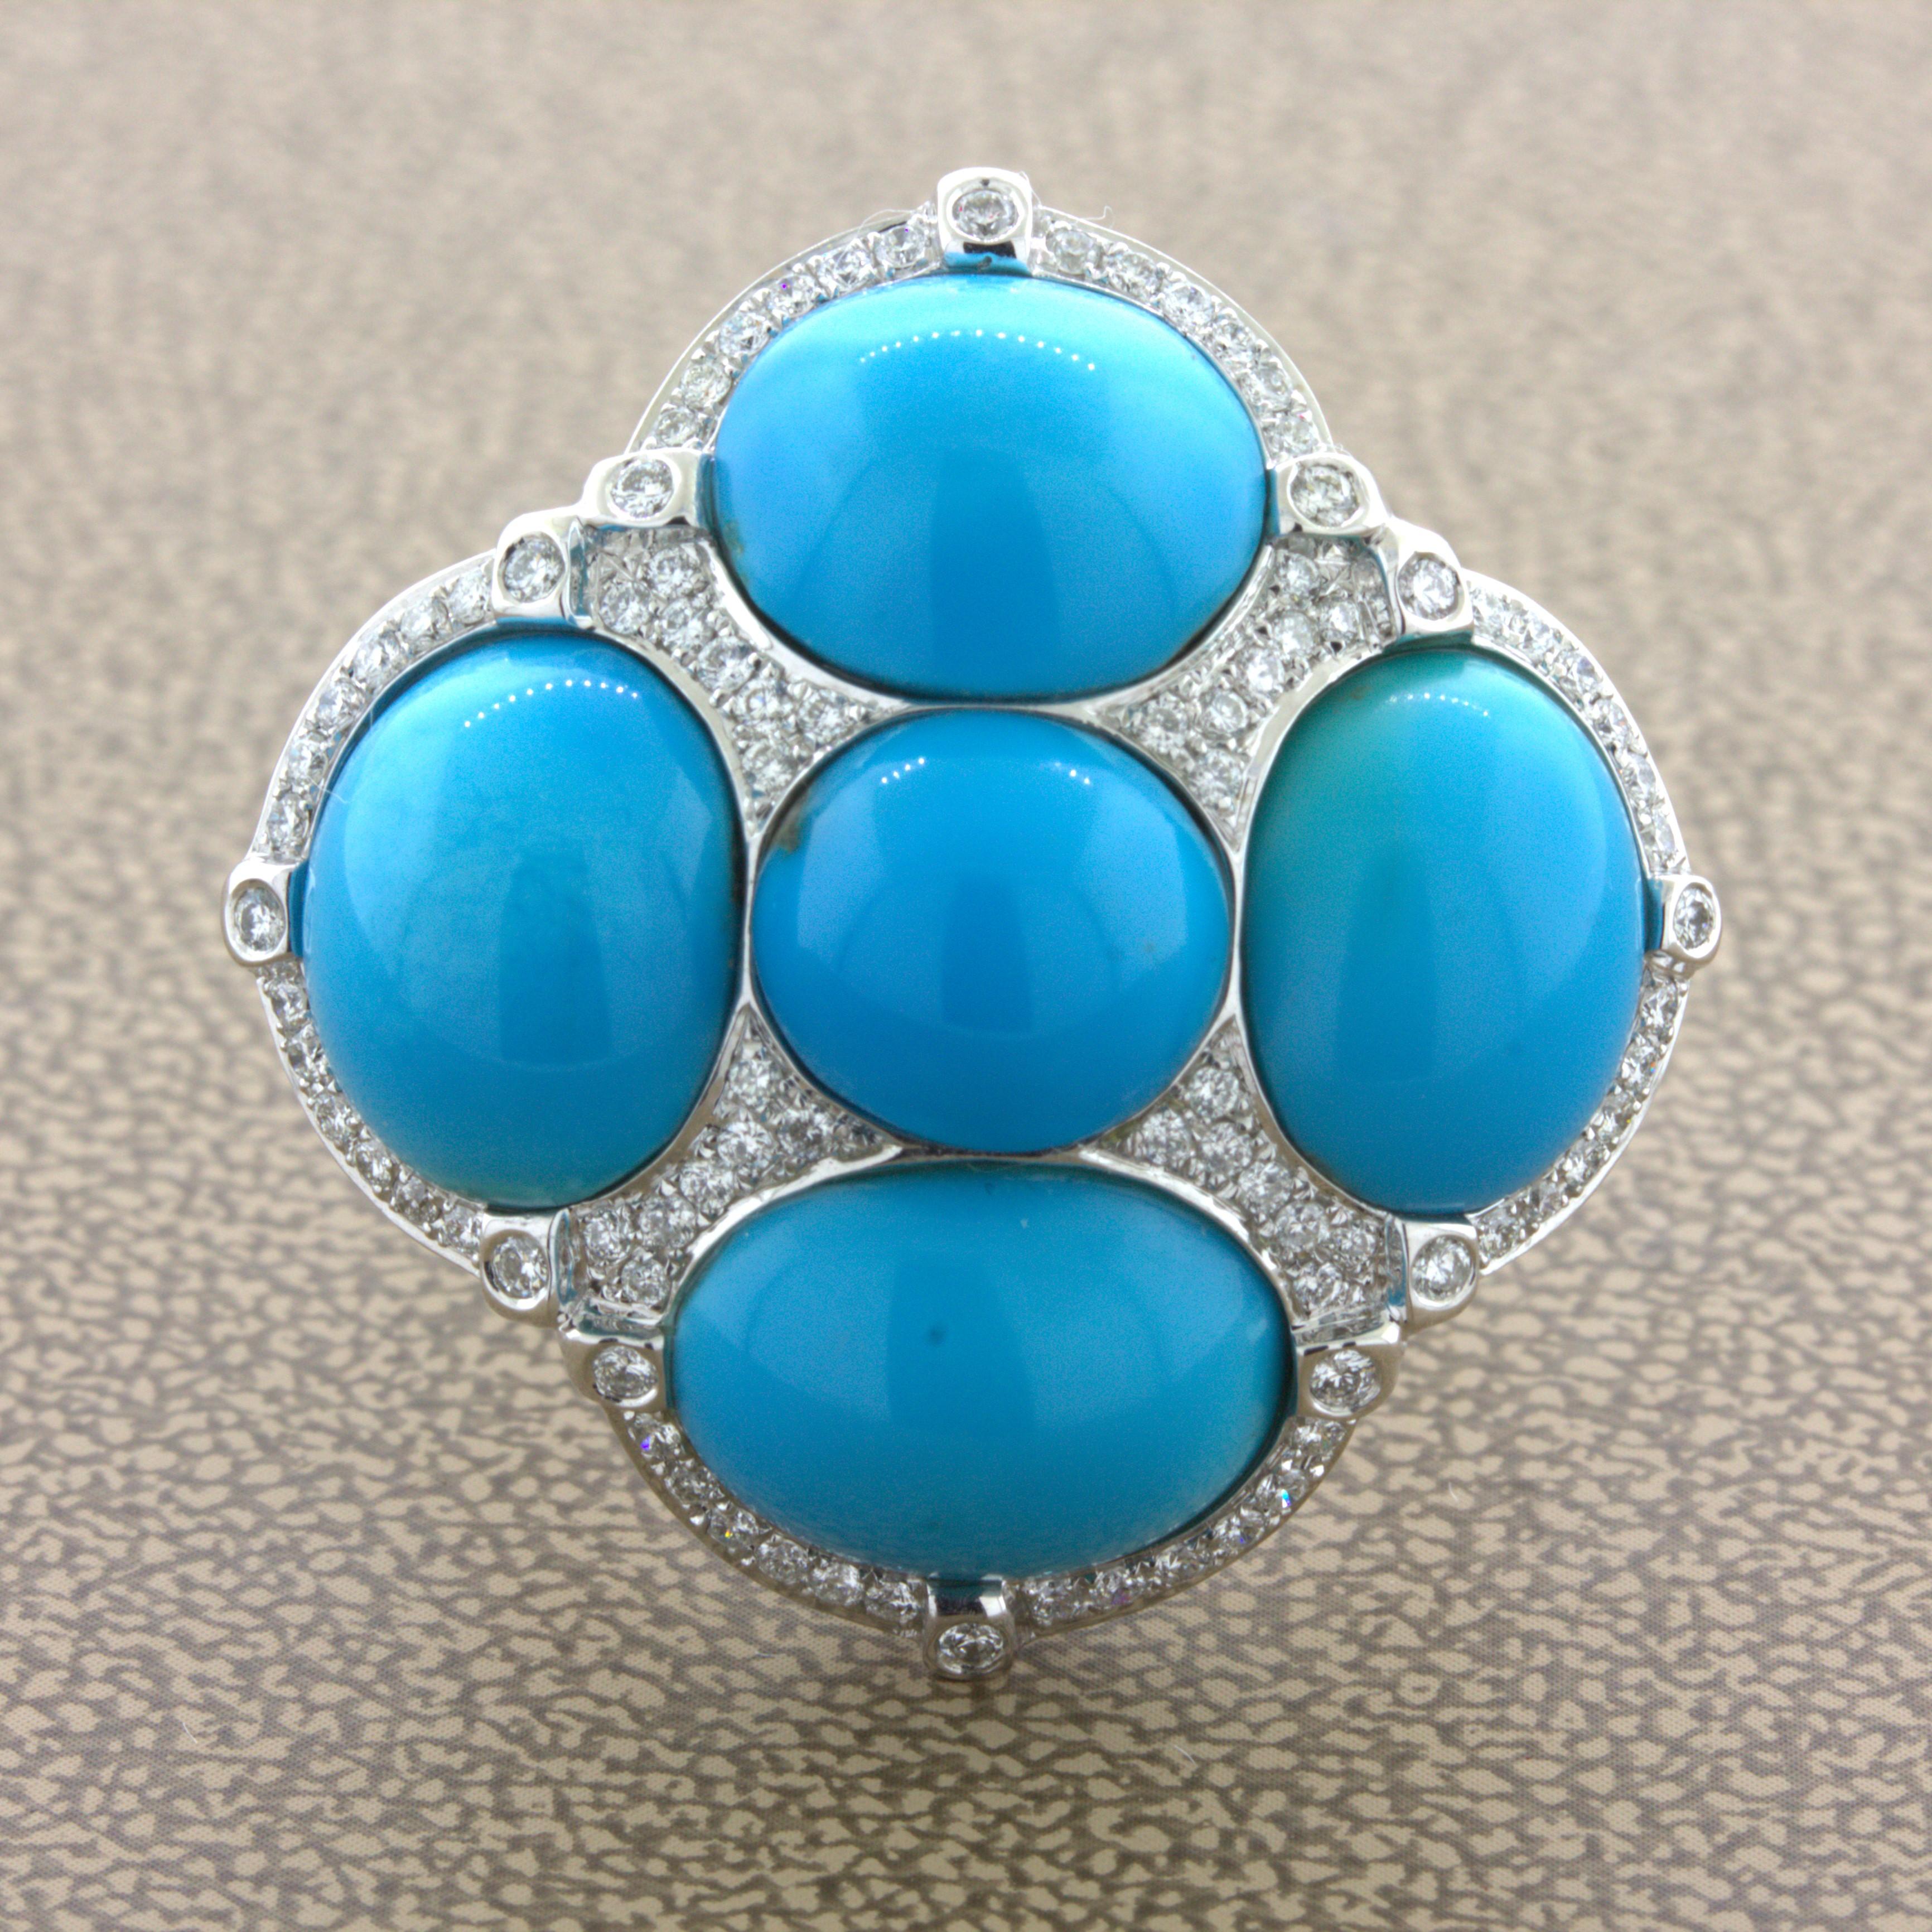 A lovely cocktail ring featuring 5 pieces of fine and matching turquoise. The turquoise have a rich even sky blue color most likely originating from the famous turquoise mines in Iran. They are complemented by 0.68 carats of round brilliant-cut